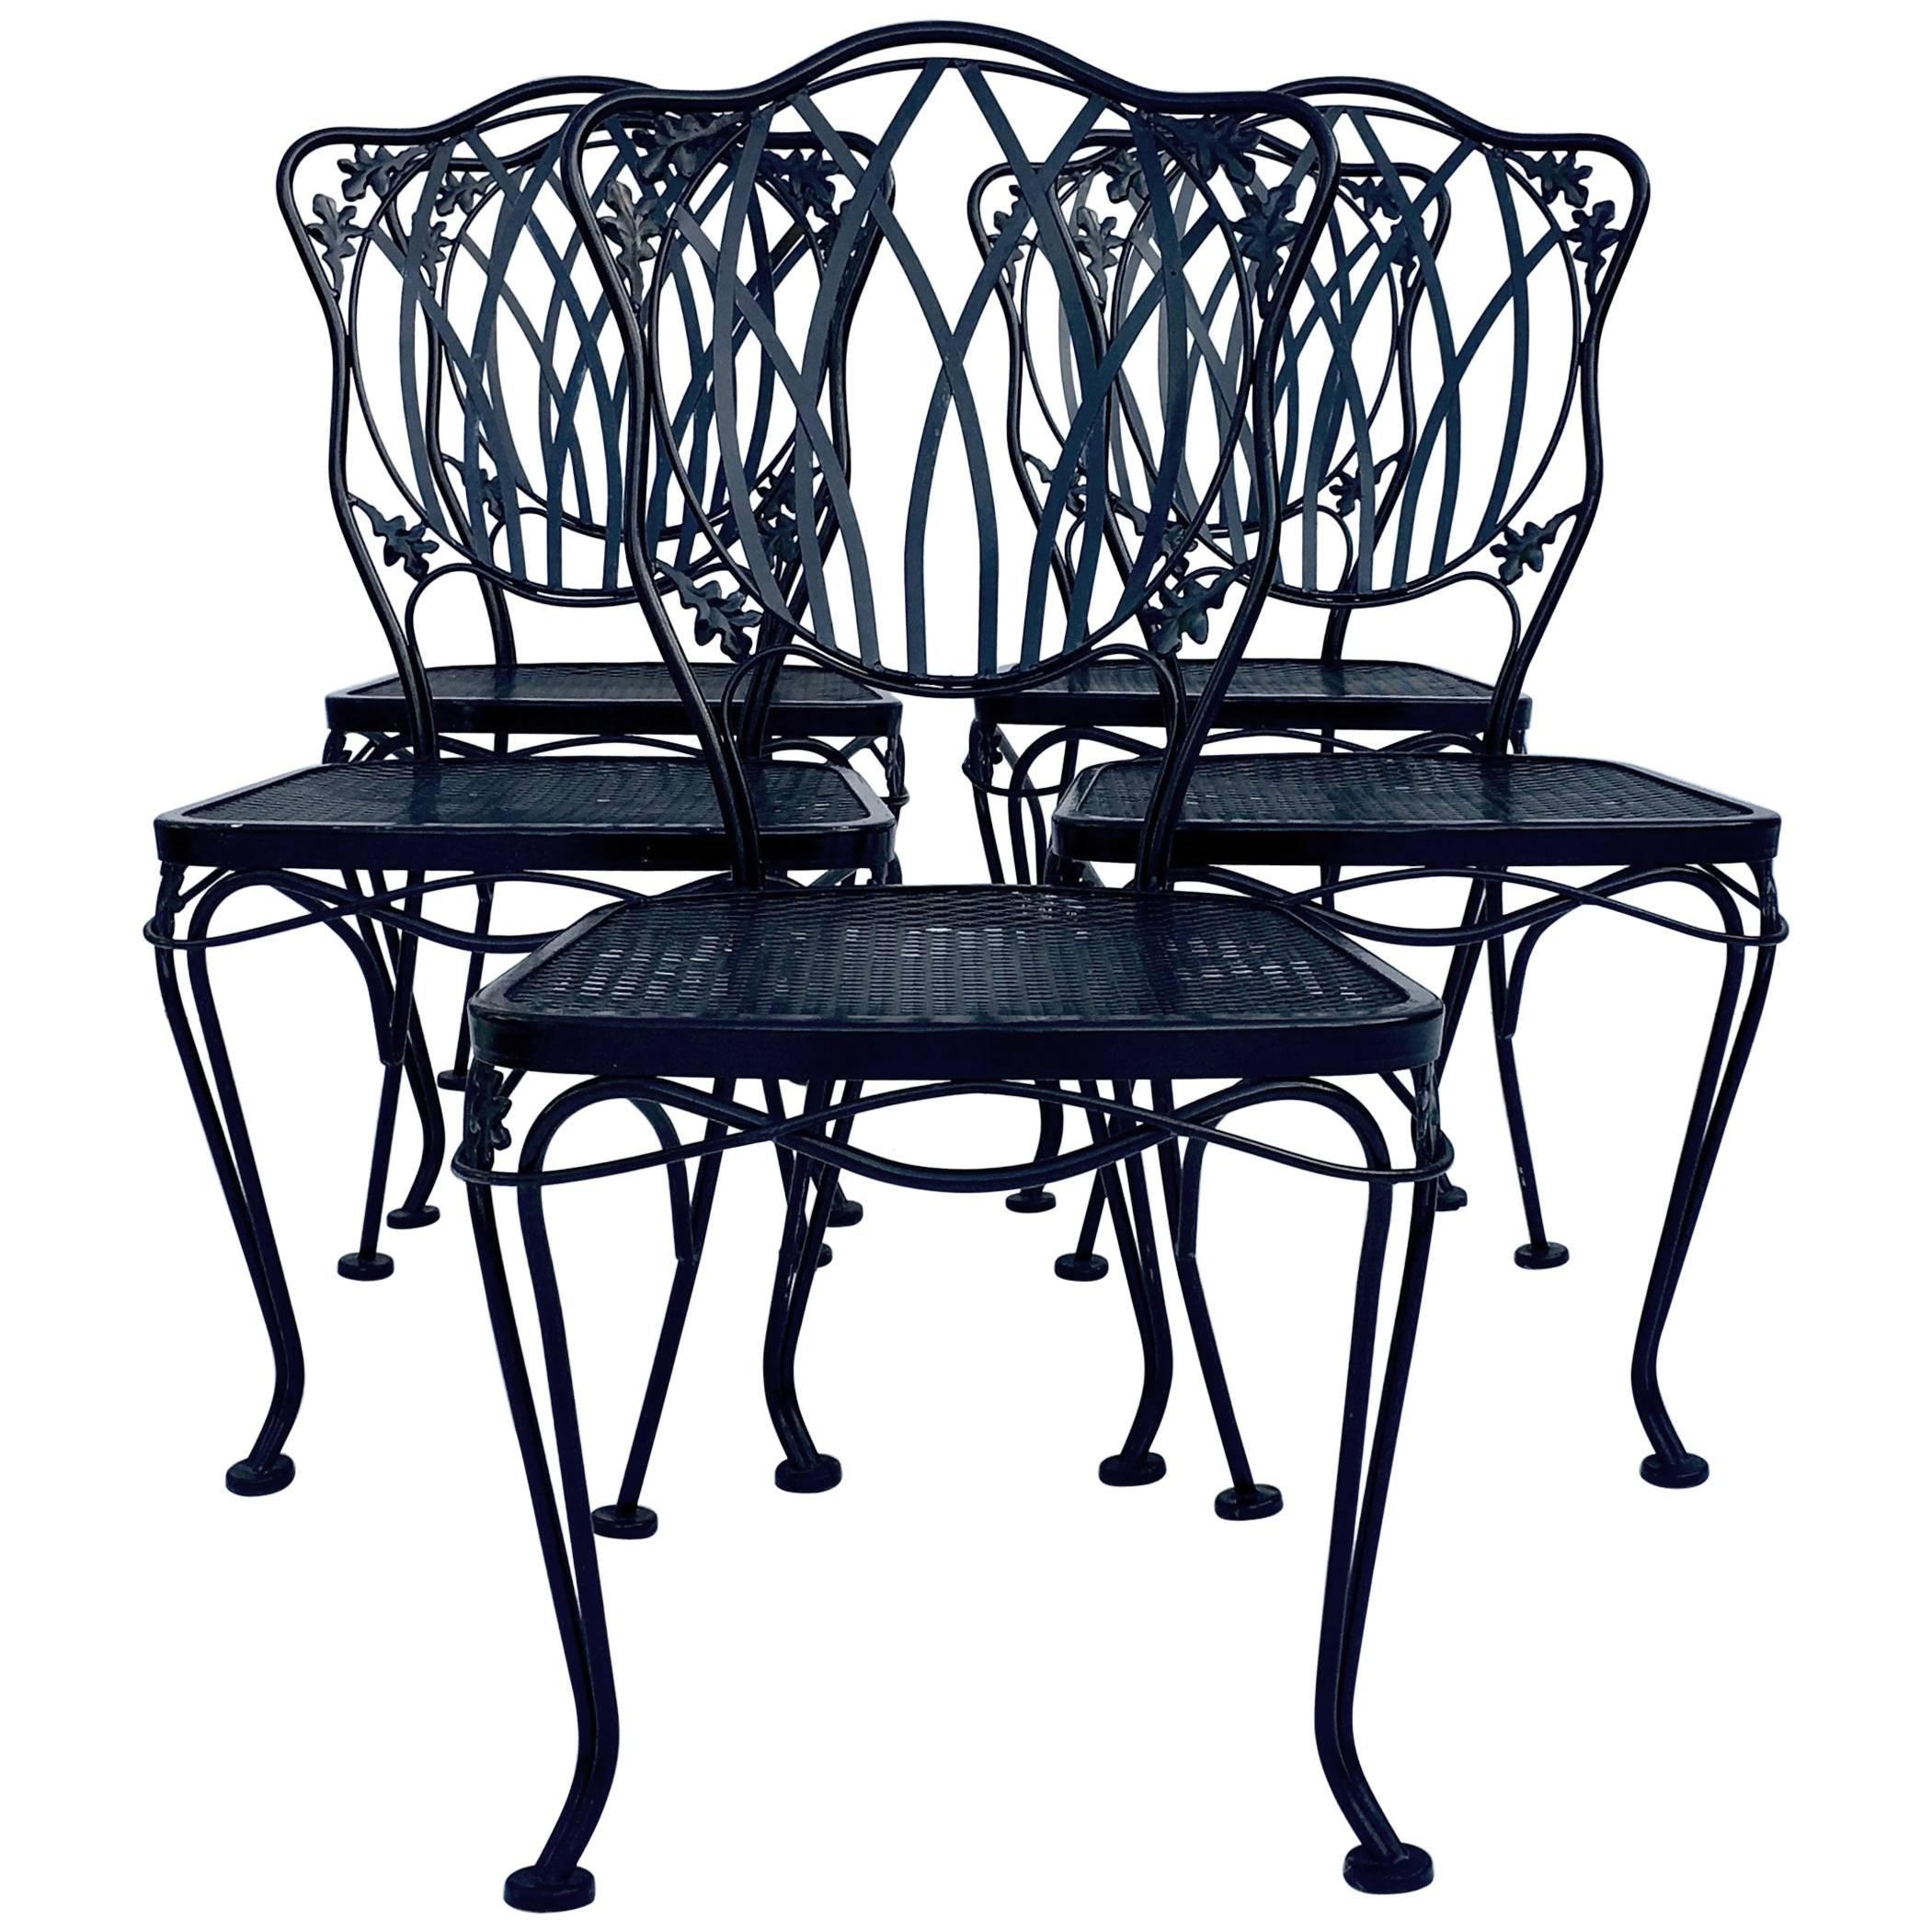 1950'S Wrought Iron Mesh Floral & Vine Chairs By Woodard-S/5 For Sale